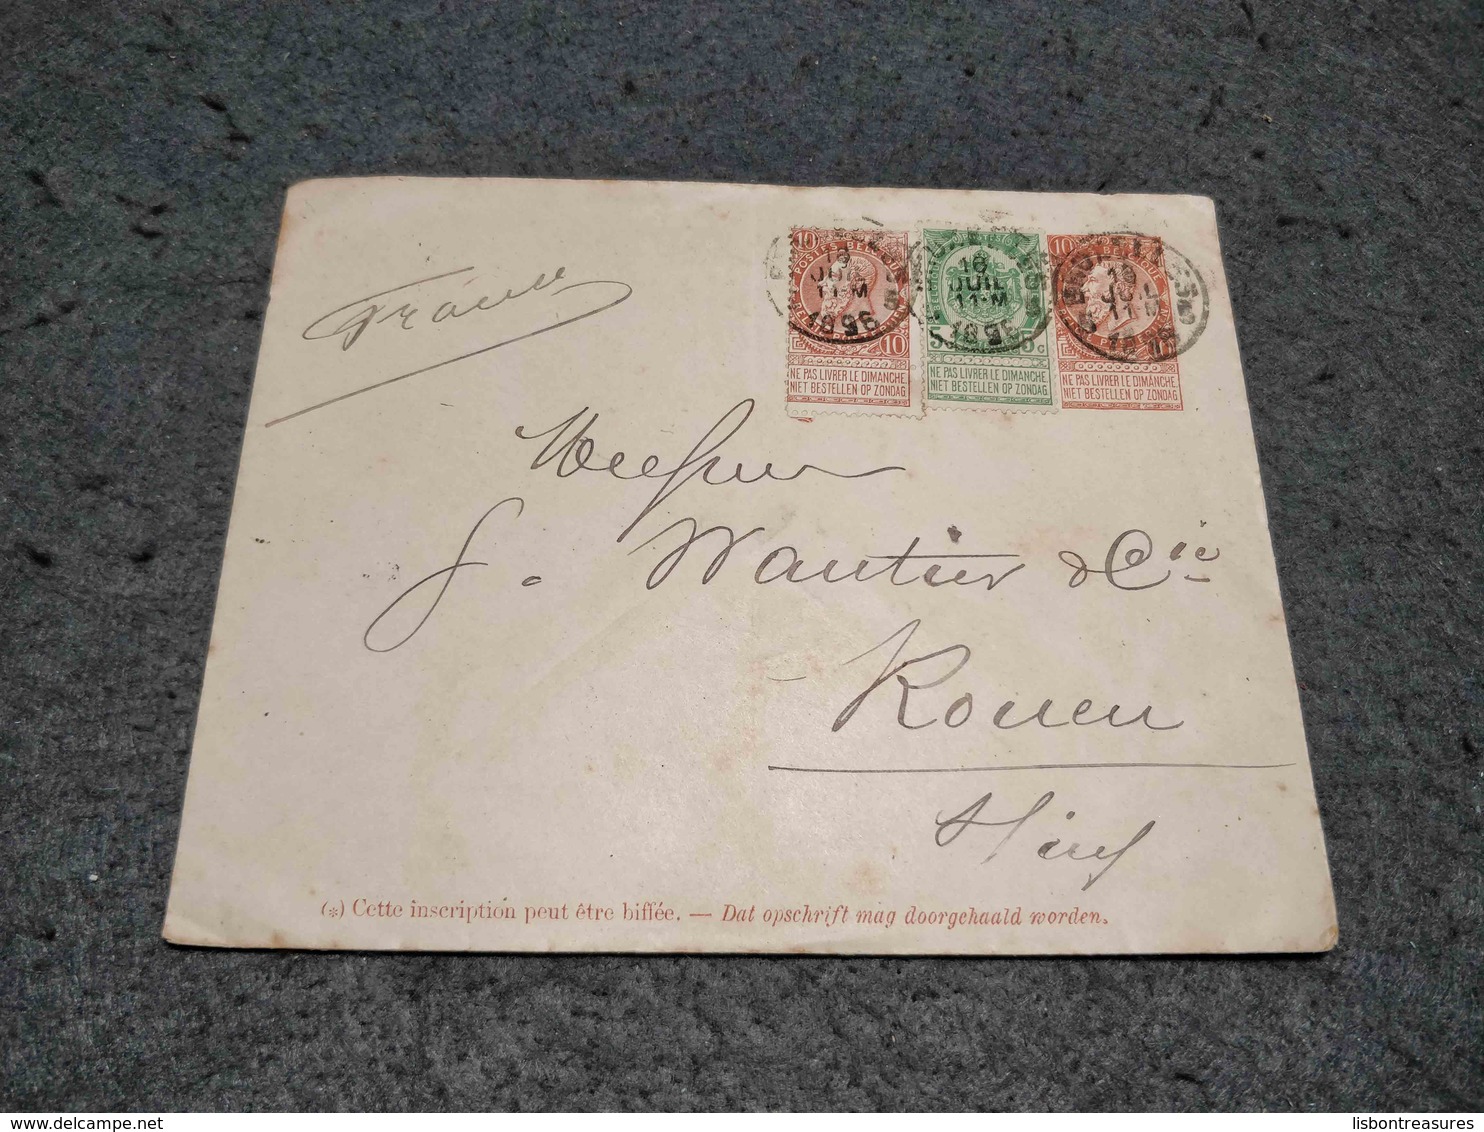 BELGIUM BELGIQUE STATIONERY COVER UPRATED X2 BRUXELLES TO ROUEN FRANCE 1896 - Briefumschläge